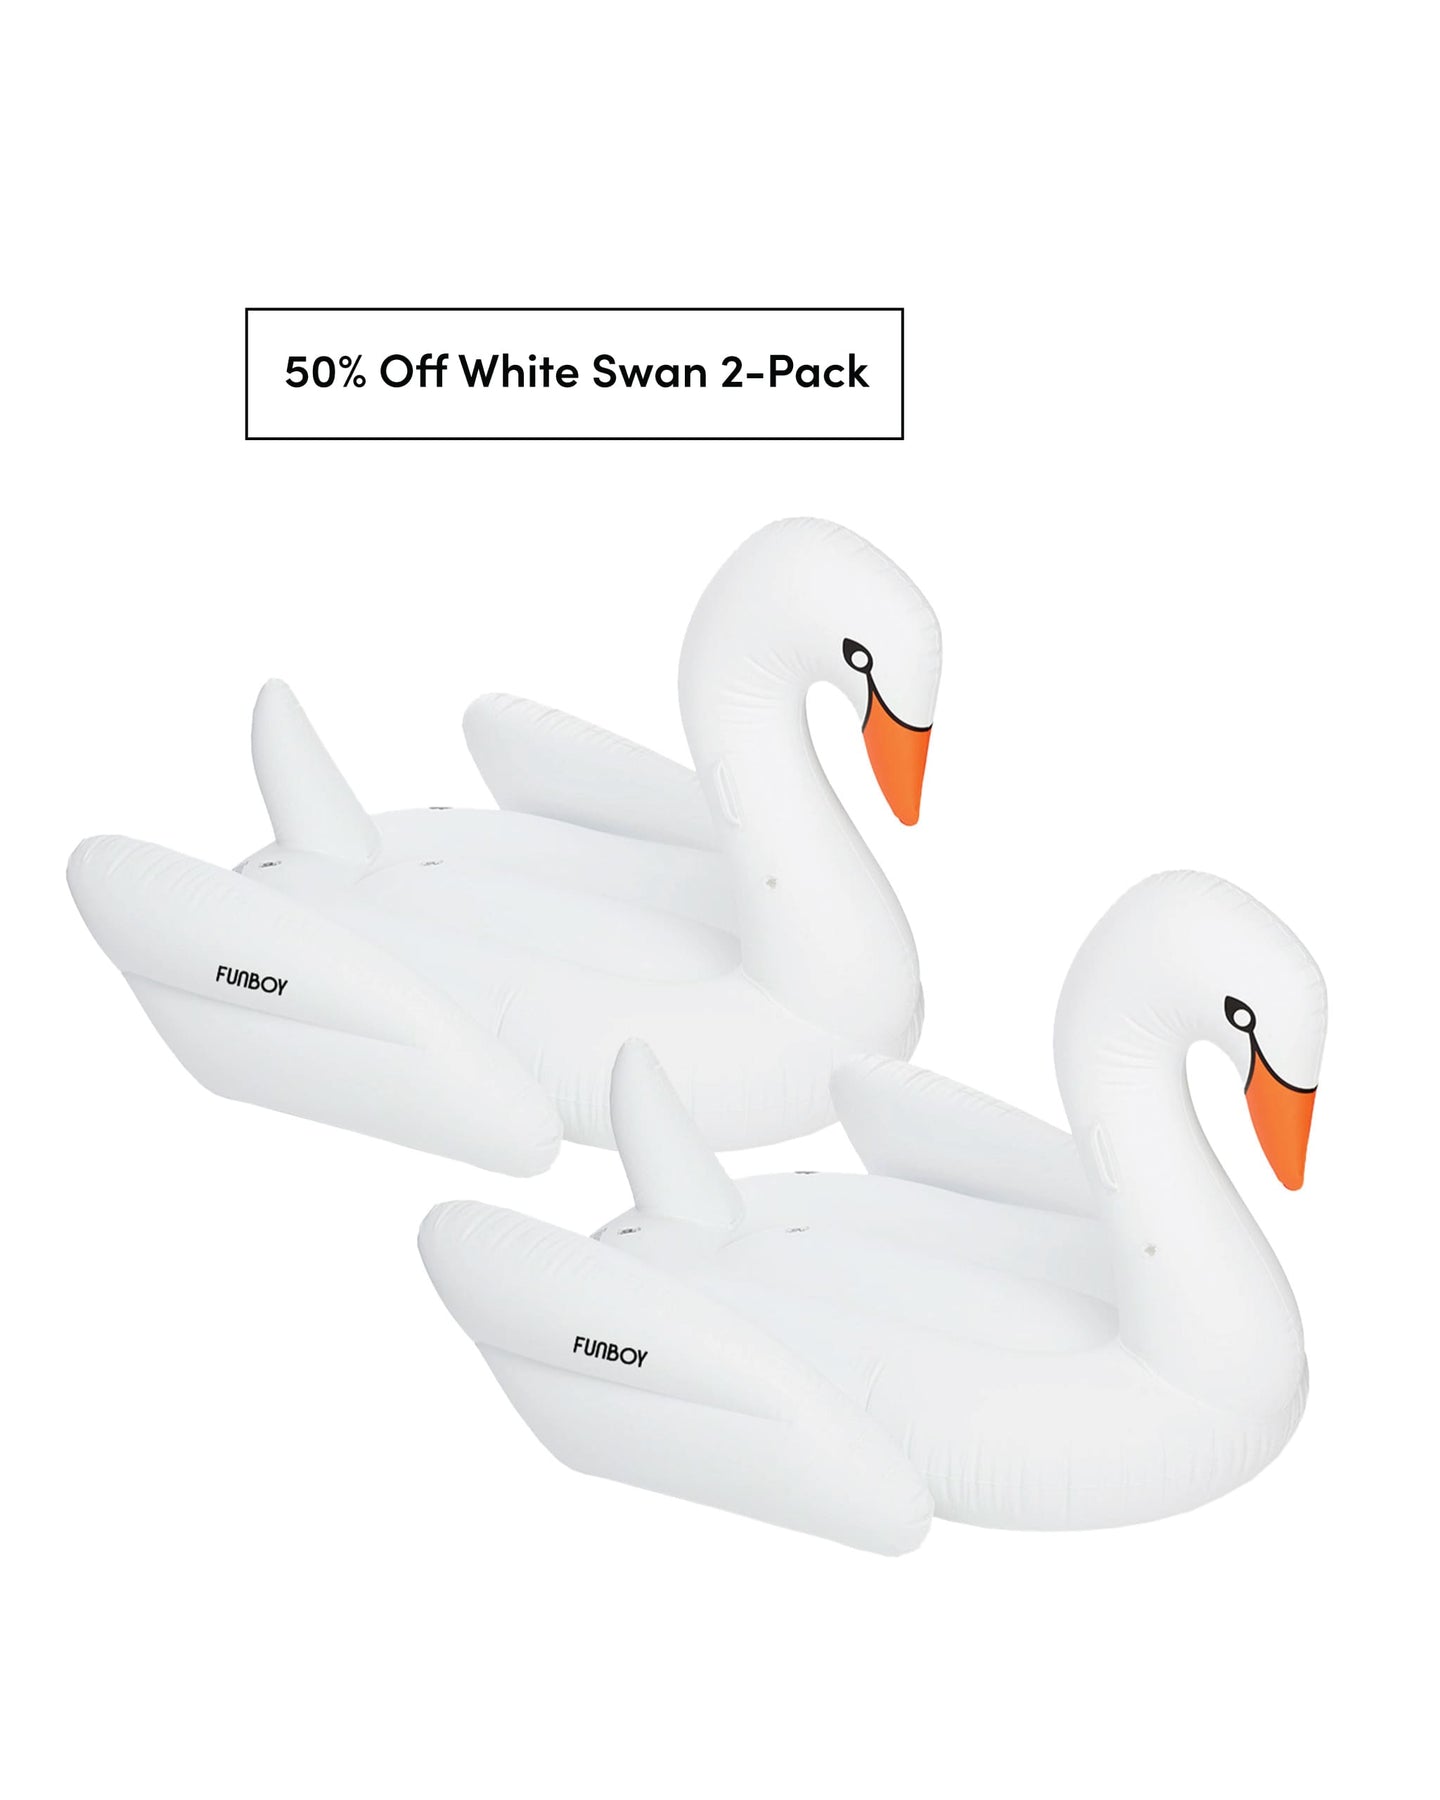 50% off white swan 2 pack